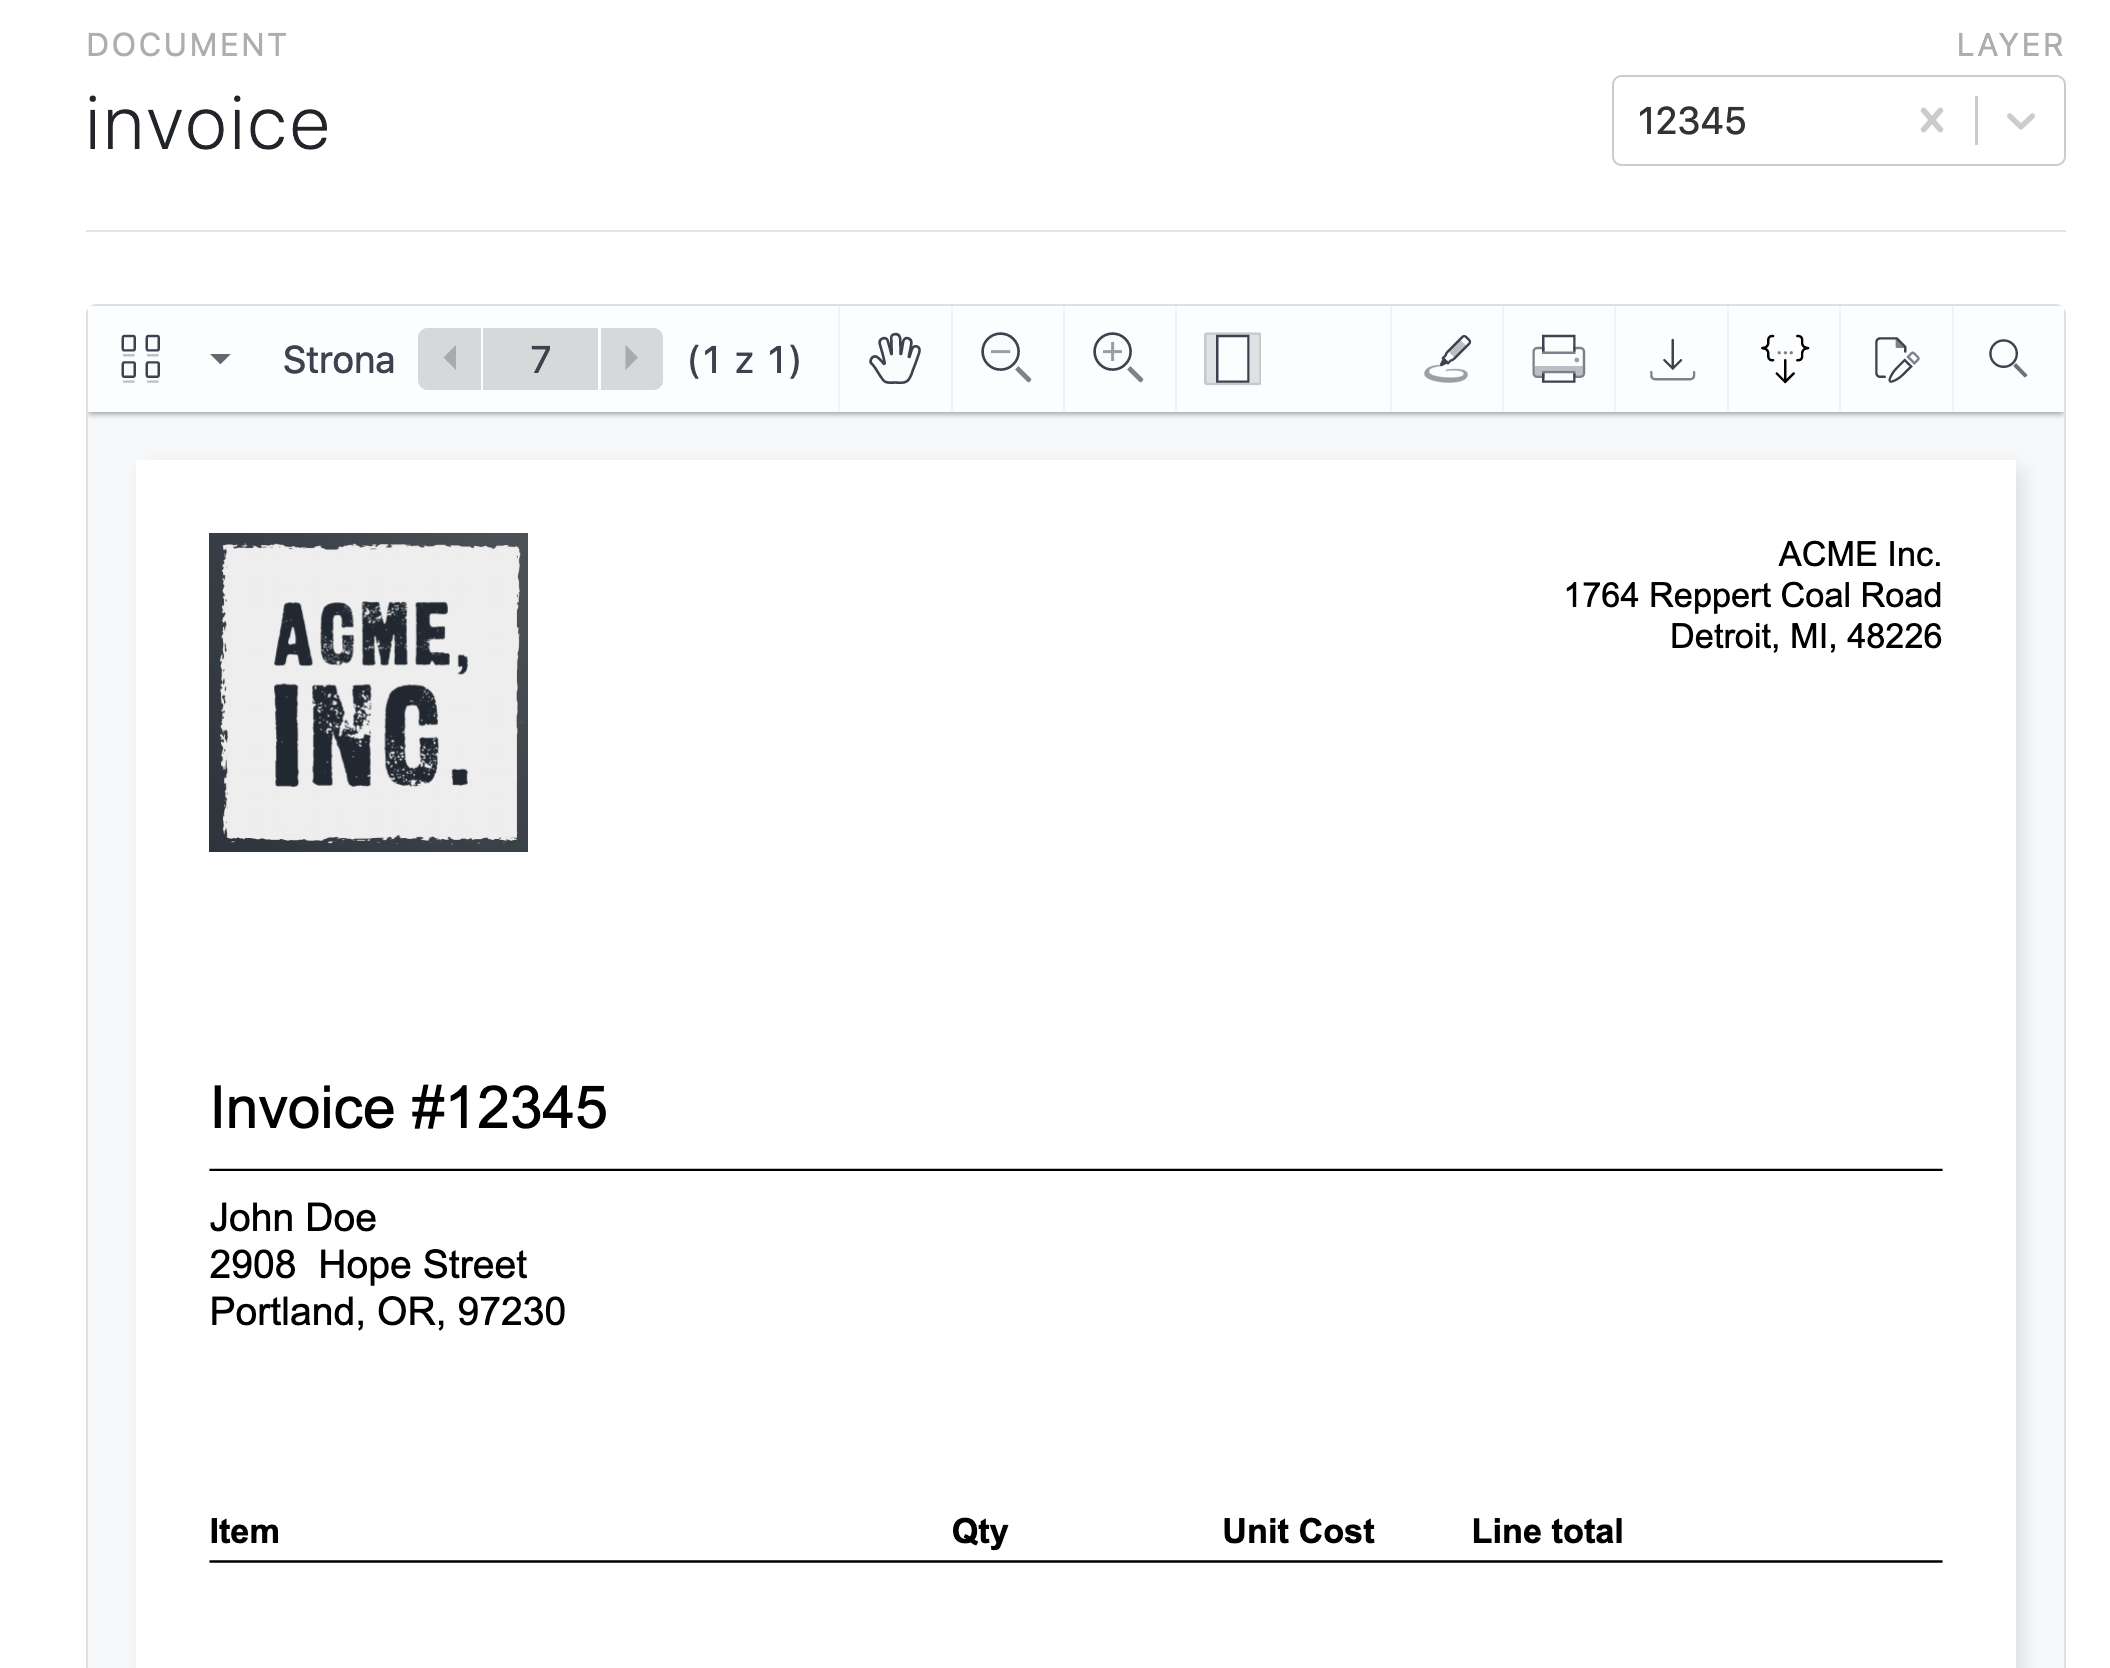 Invoice number and customer details filled-in